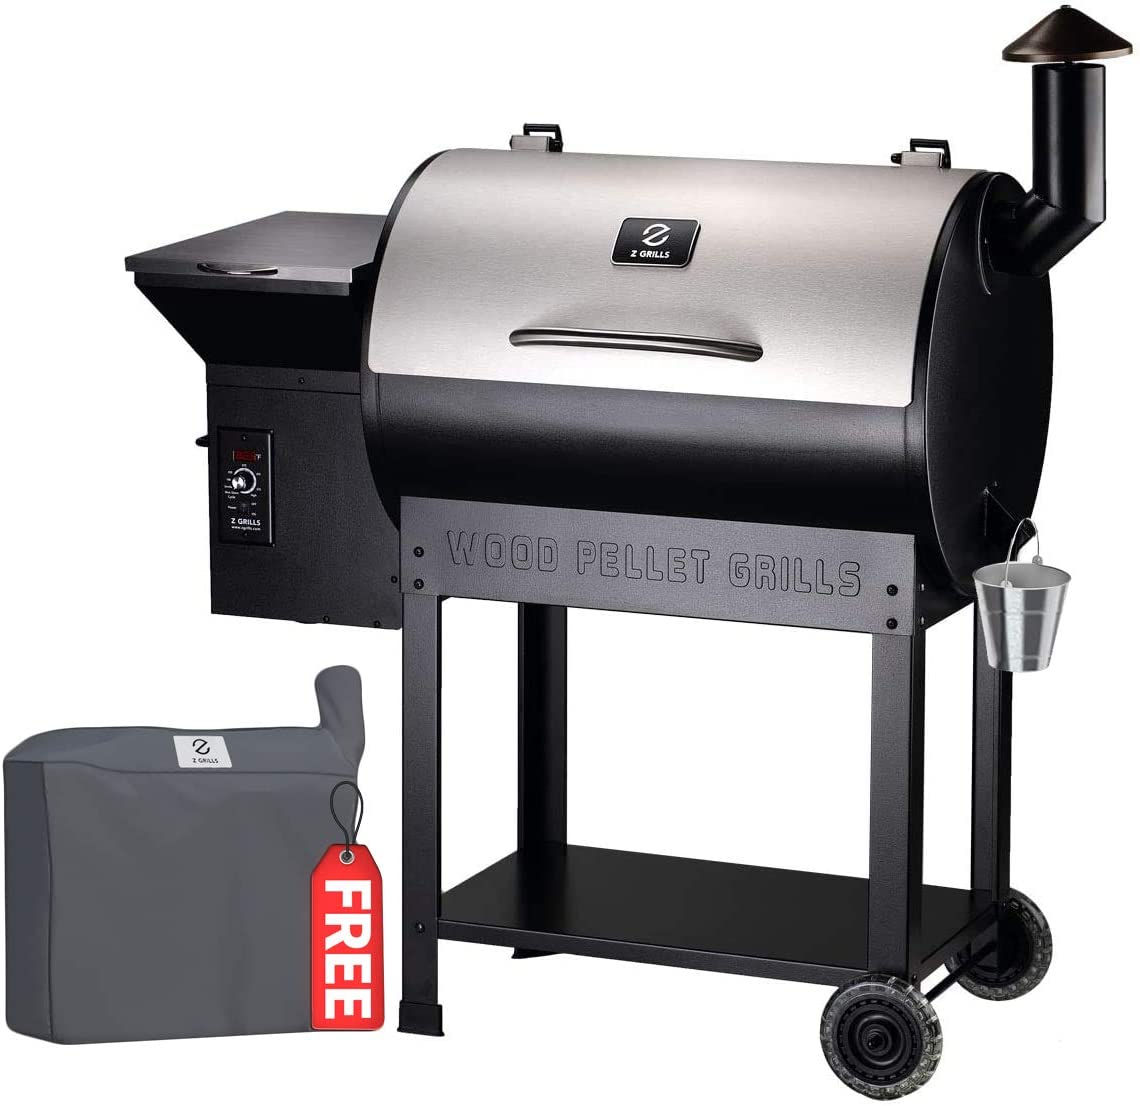 Z GRILLS 7002E Smart Wood Pellet Grill 8 in 1 Outdoor BBQ Smoker 700 SQ Inches Cooking Area Barbecue Grill Stainless and Black - image 1 of 8